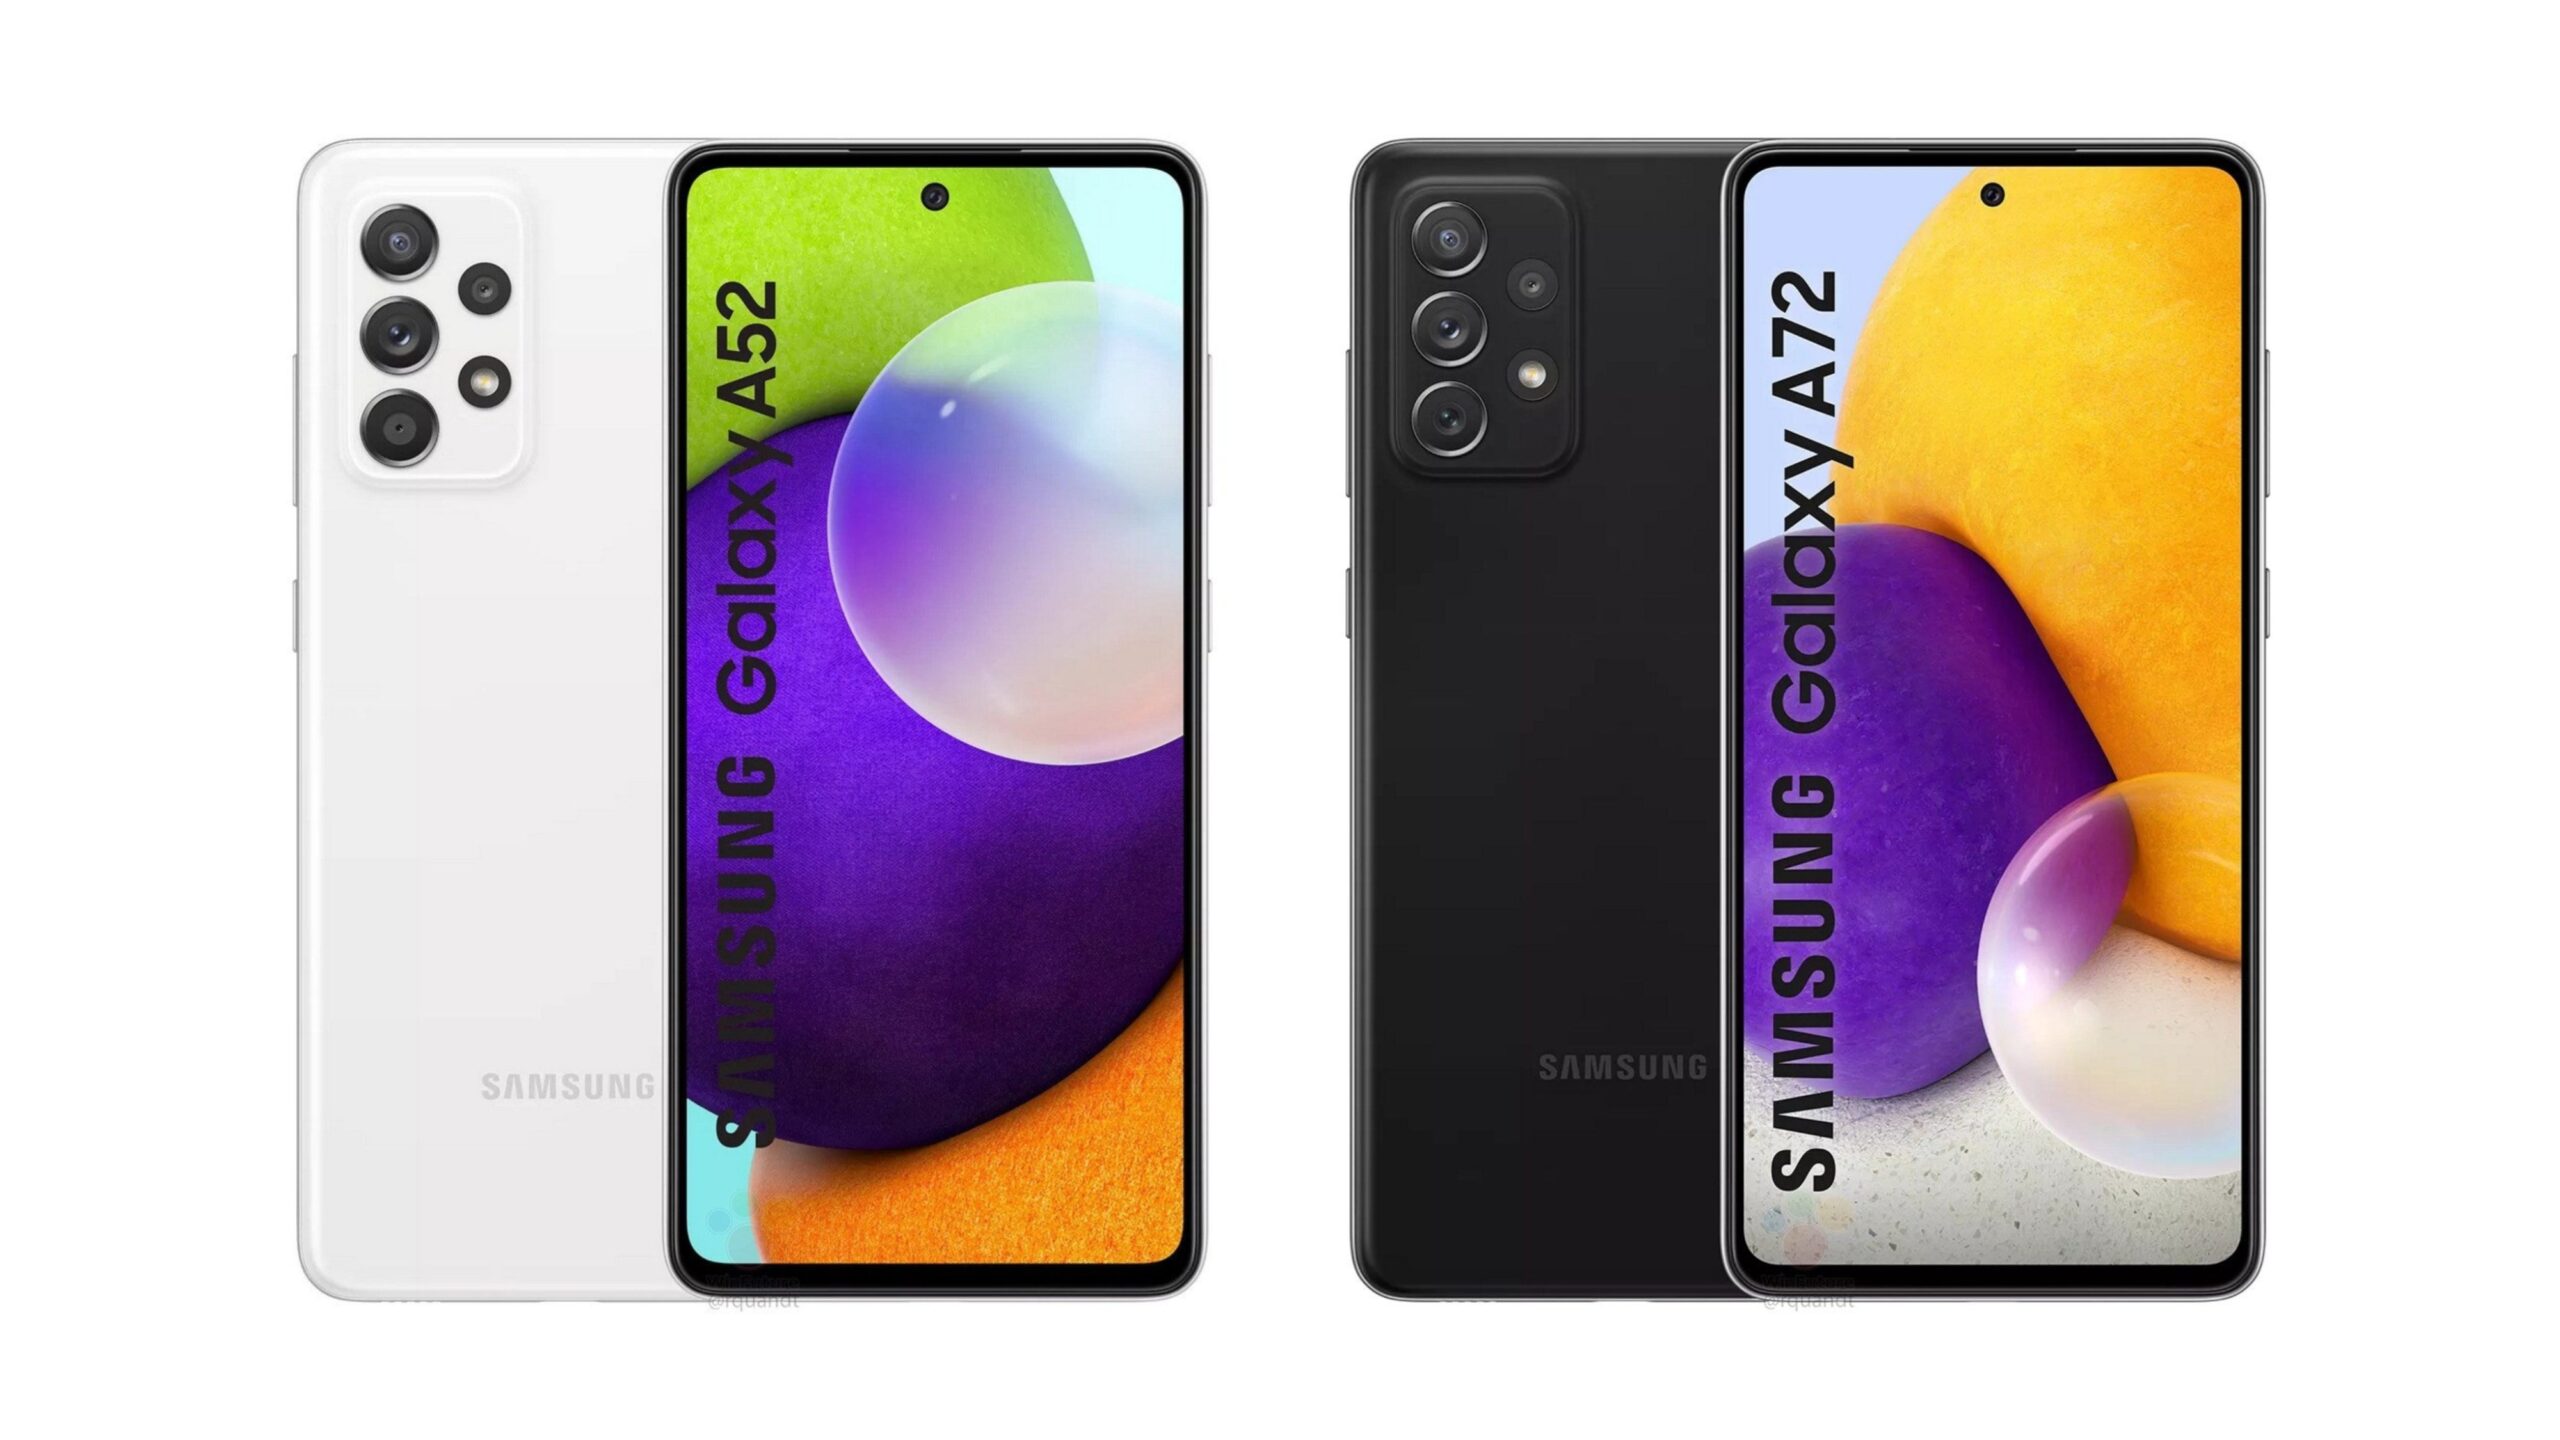 Samsung Galaxy A52/A72 will feature stereo speakers, built-in Snapchat lenses, 30x Space Zoom, and more